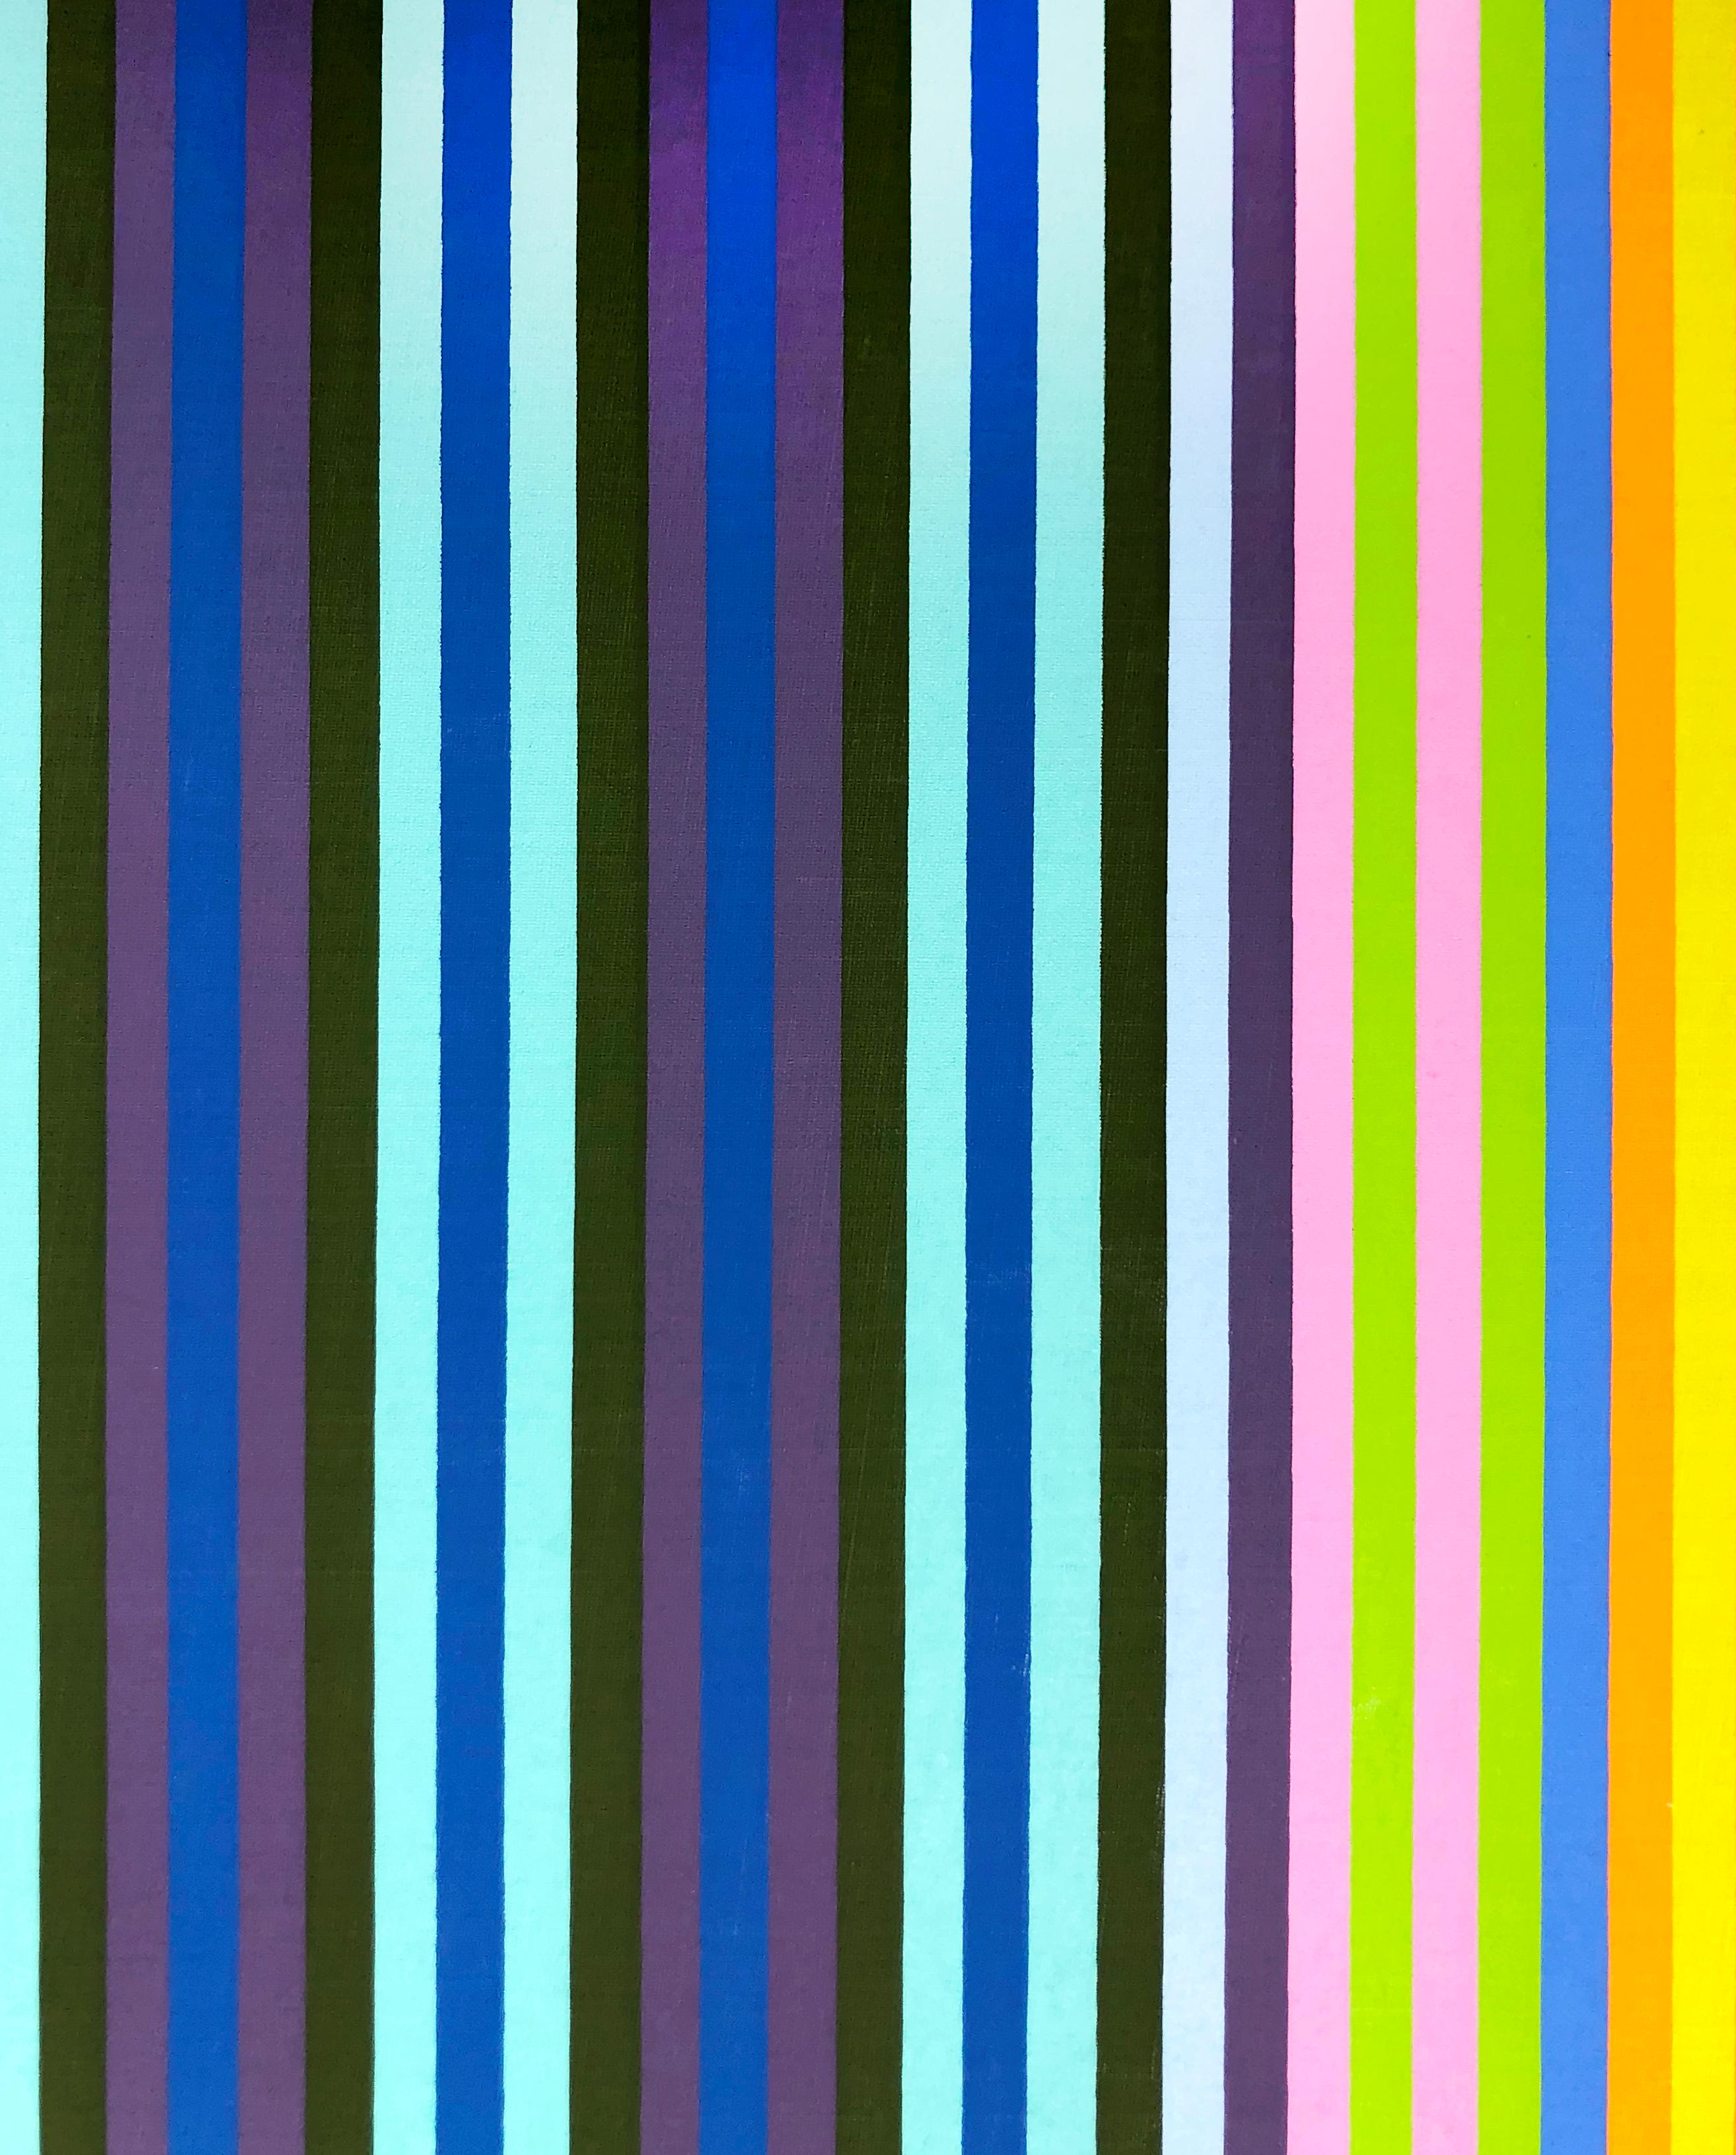 Vertical stripes, the artist’s trademark, run perfectly even and parallel down the sheet in ultramarine, light blue, black, purple, lime green, yellow, orange, pink, and periwinkle. It is within this deceptively simple format that Gene Davis has